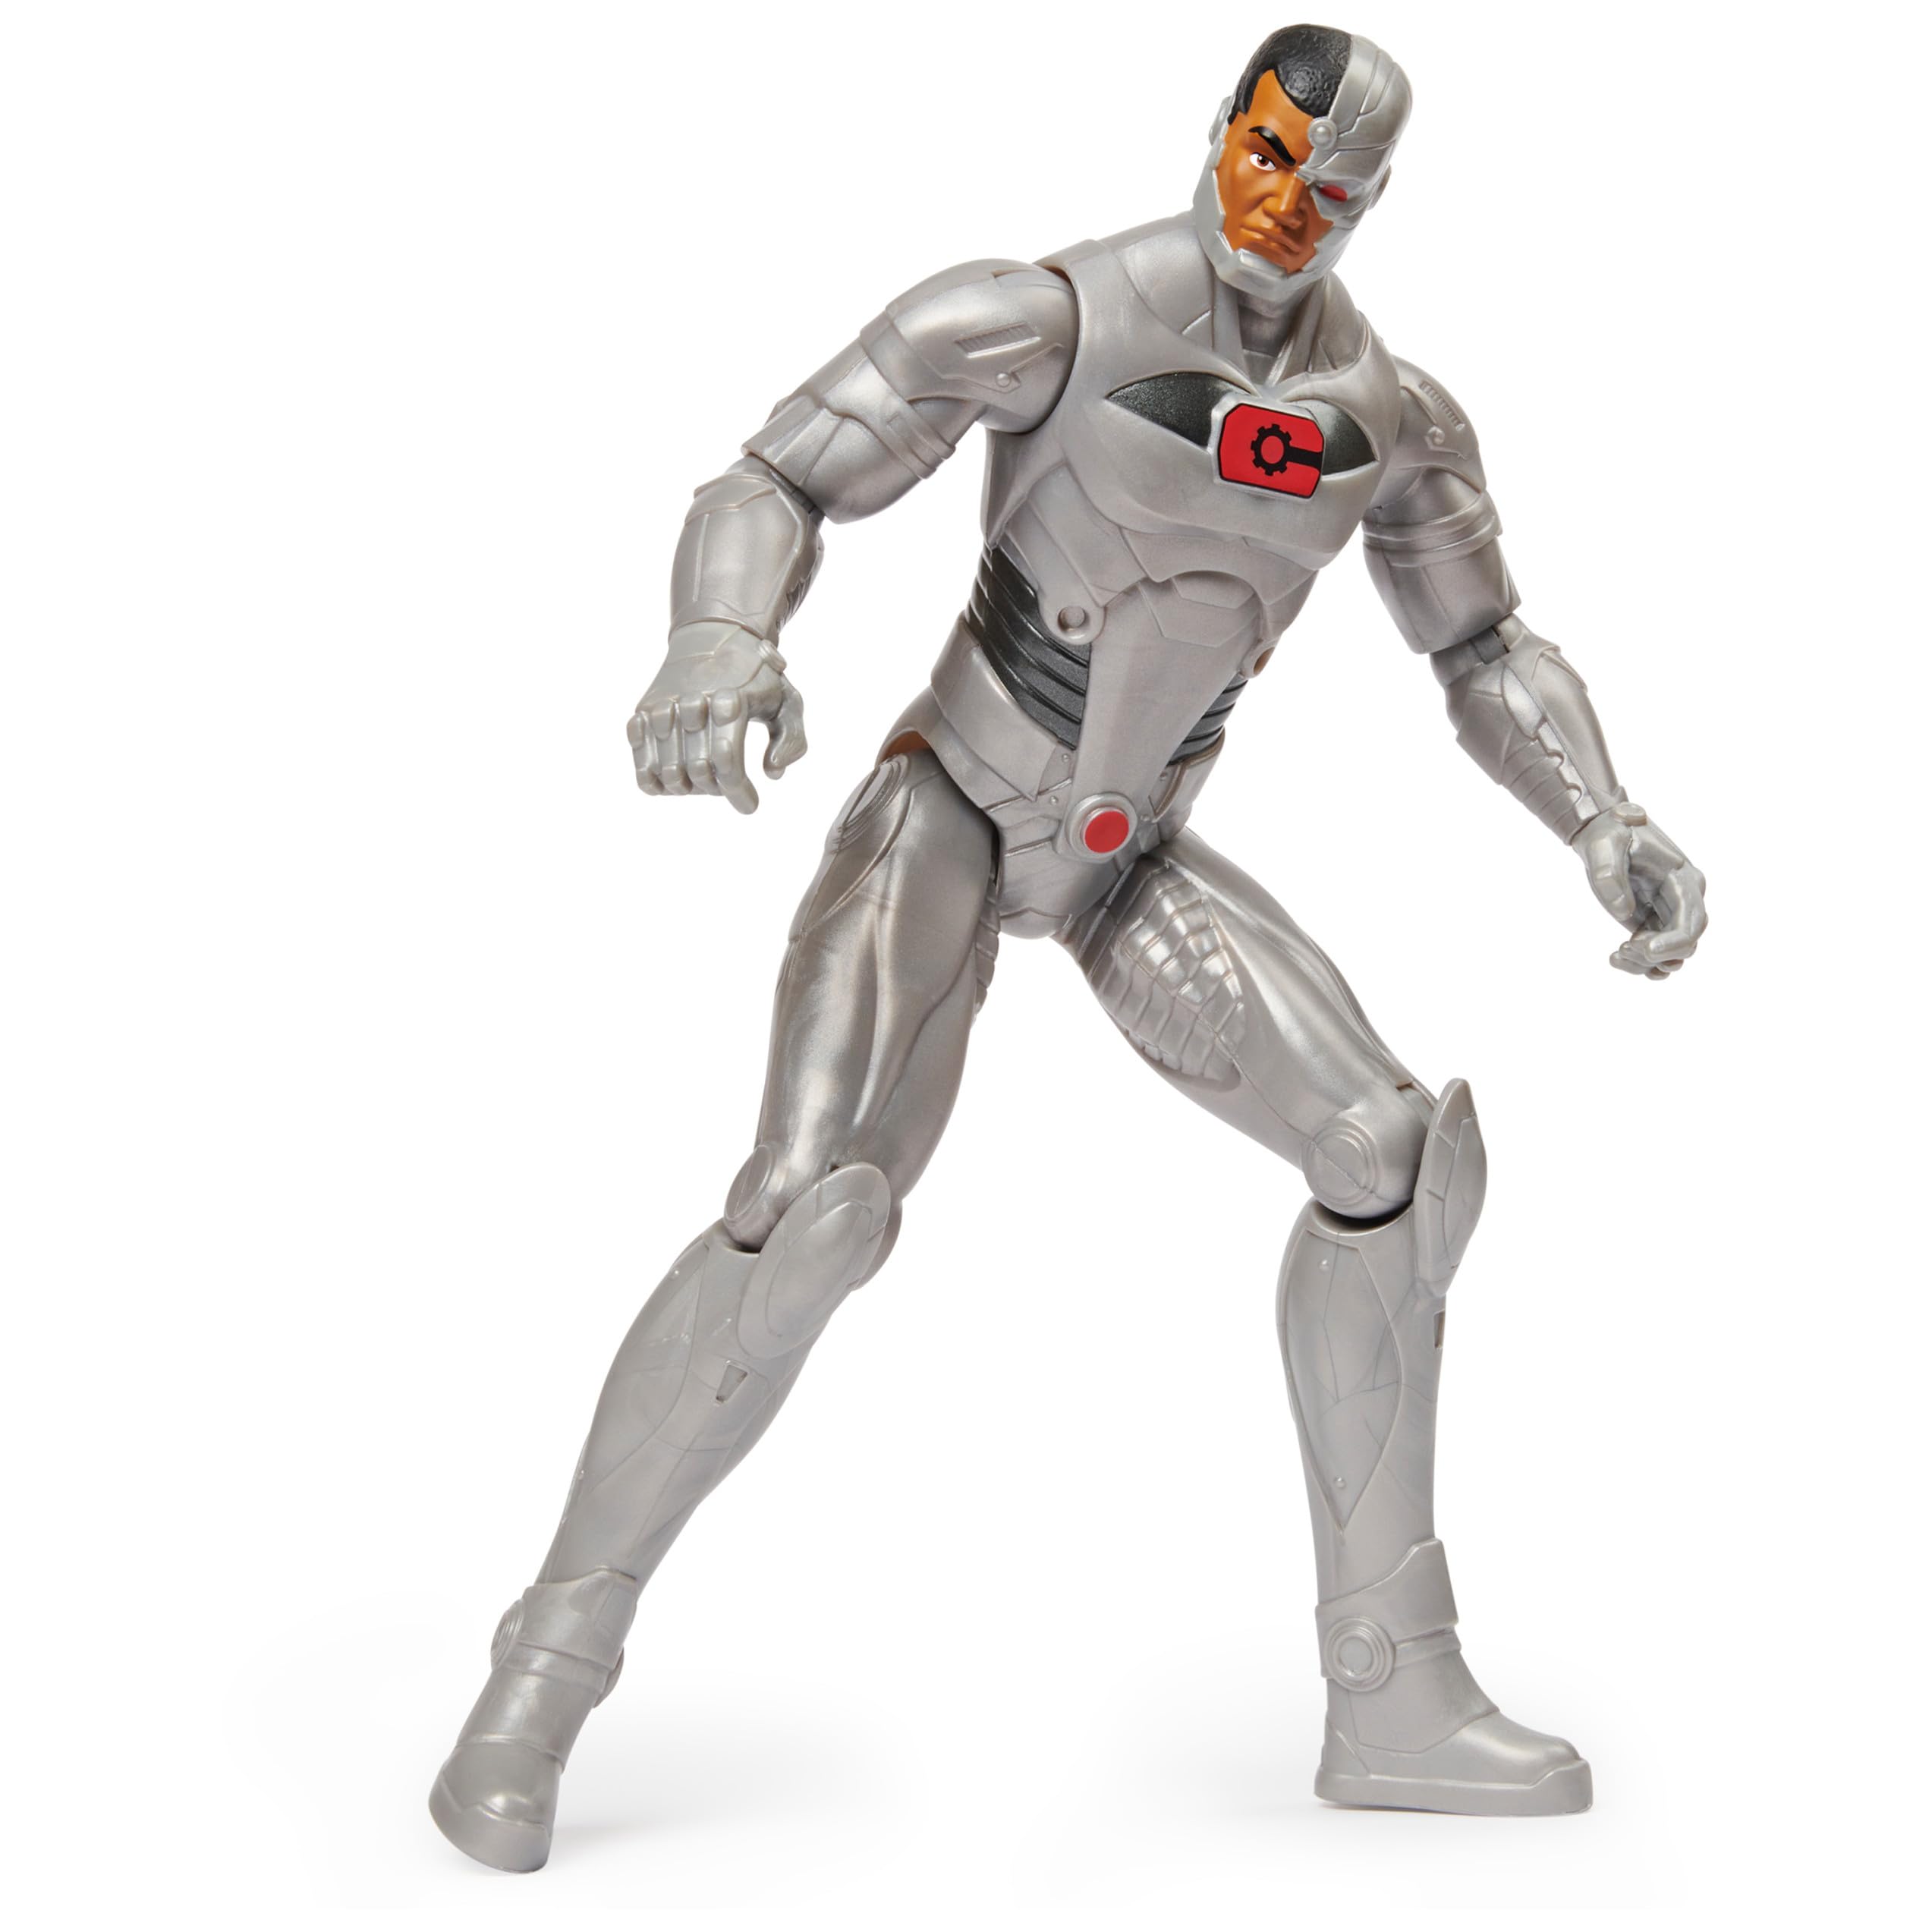 DC Comics 12-inch Cyborg Action Figure, Kids Toys for Boys